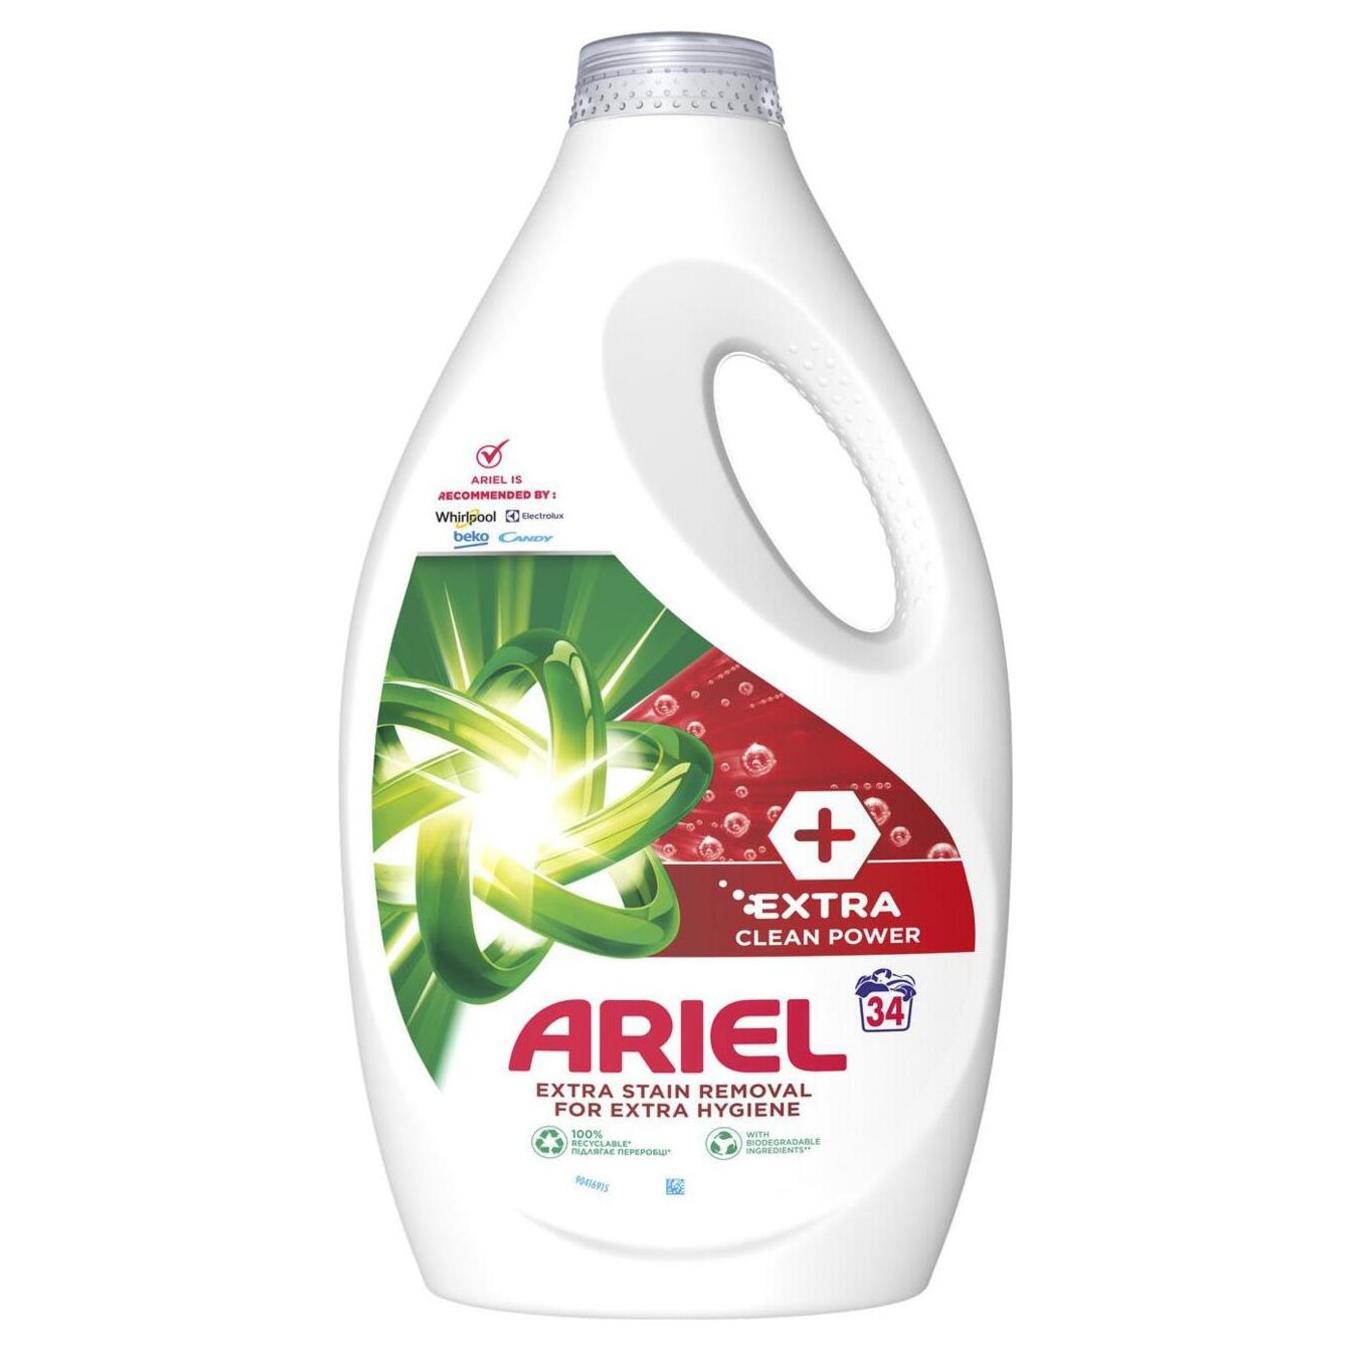 Gel for washing Ariel power of extra cleaning 1.7 l